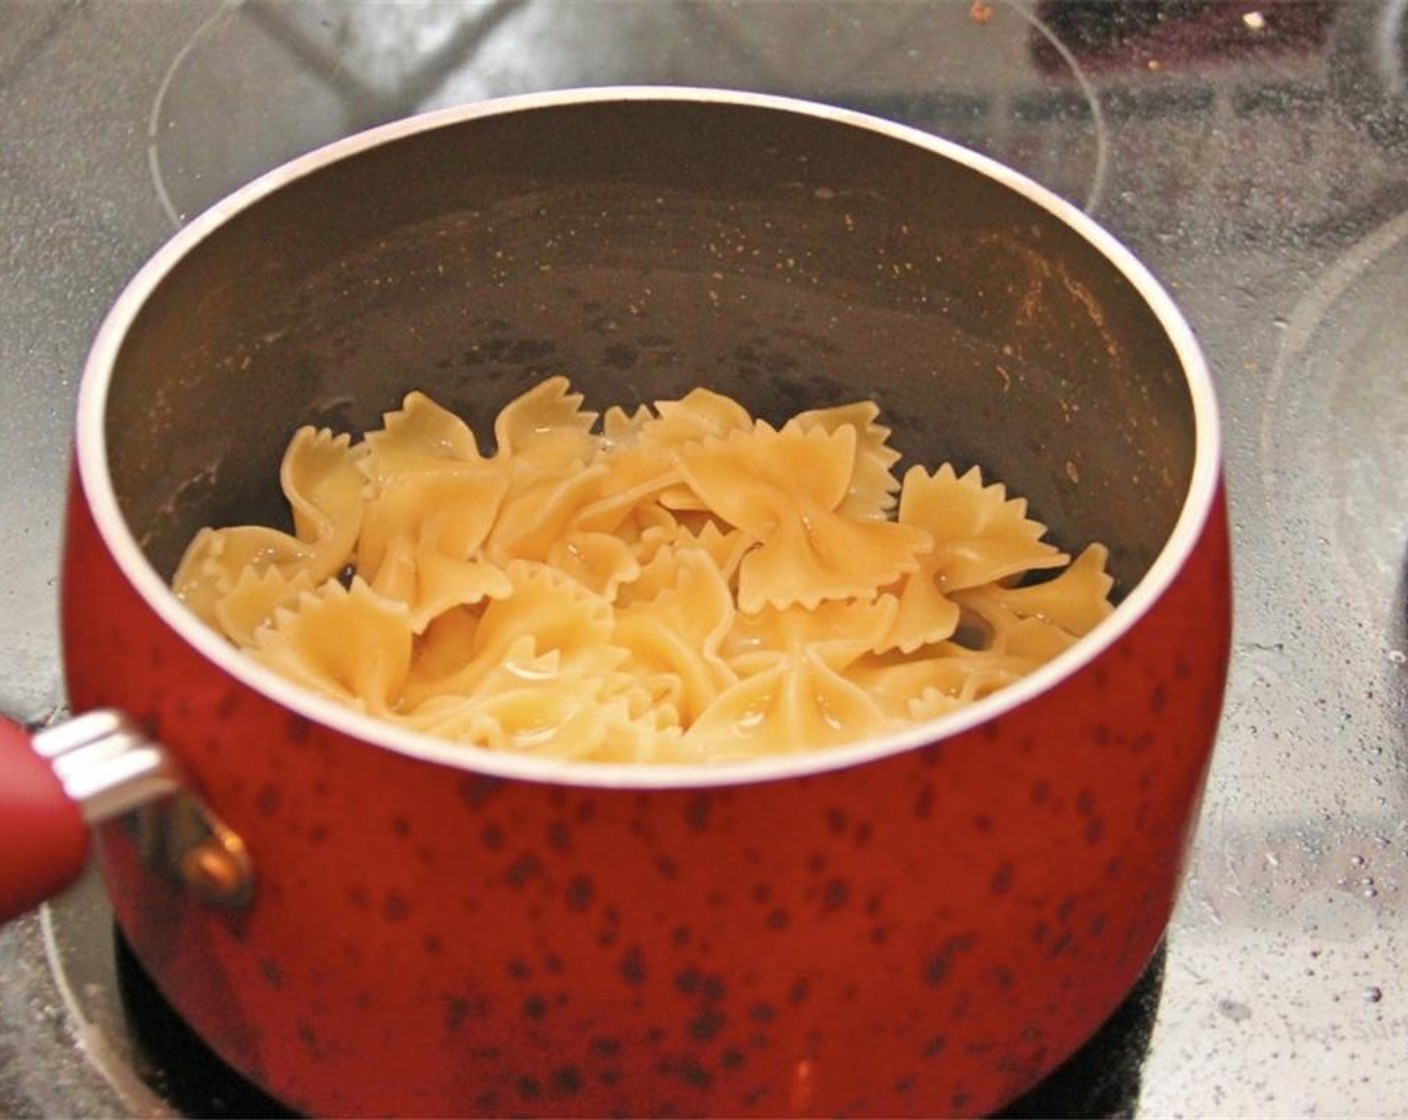 step 2 Cook the Farfalle Pasta (8 oz) according to package's instructions. When pasta is finished cooking, transfer pasta to a large colander to drain. Then immediately rinse it in cold water to halt the cooking.